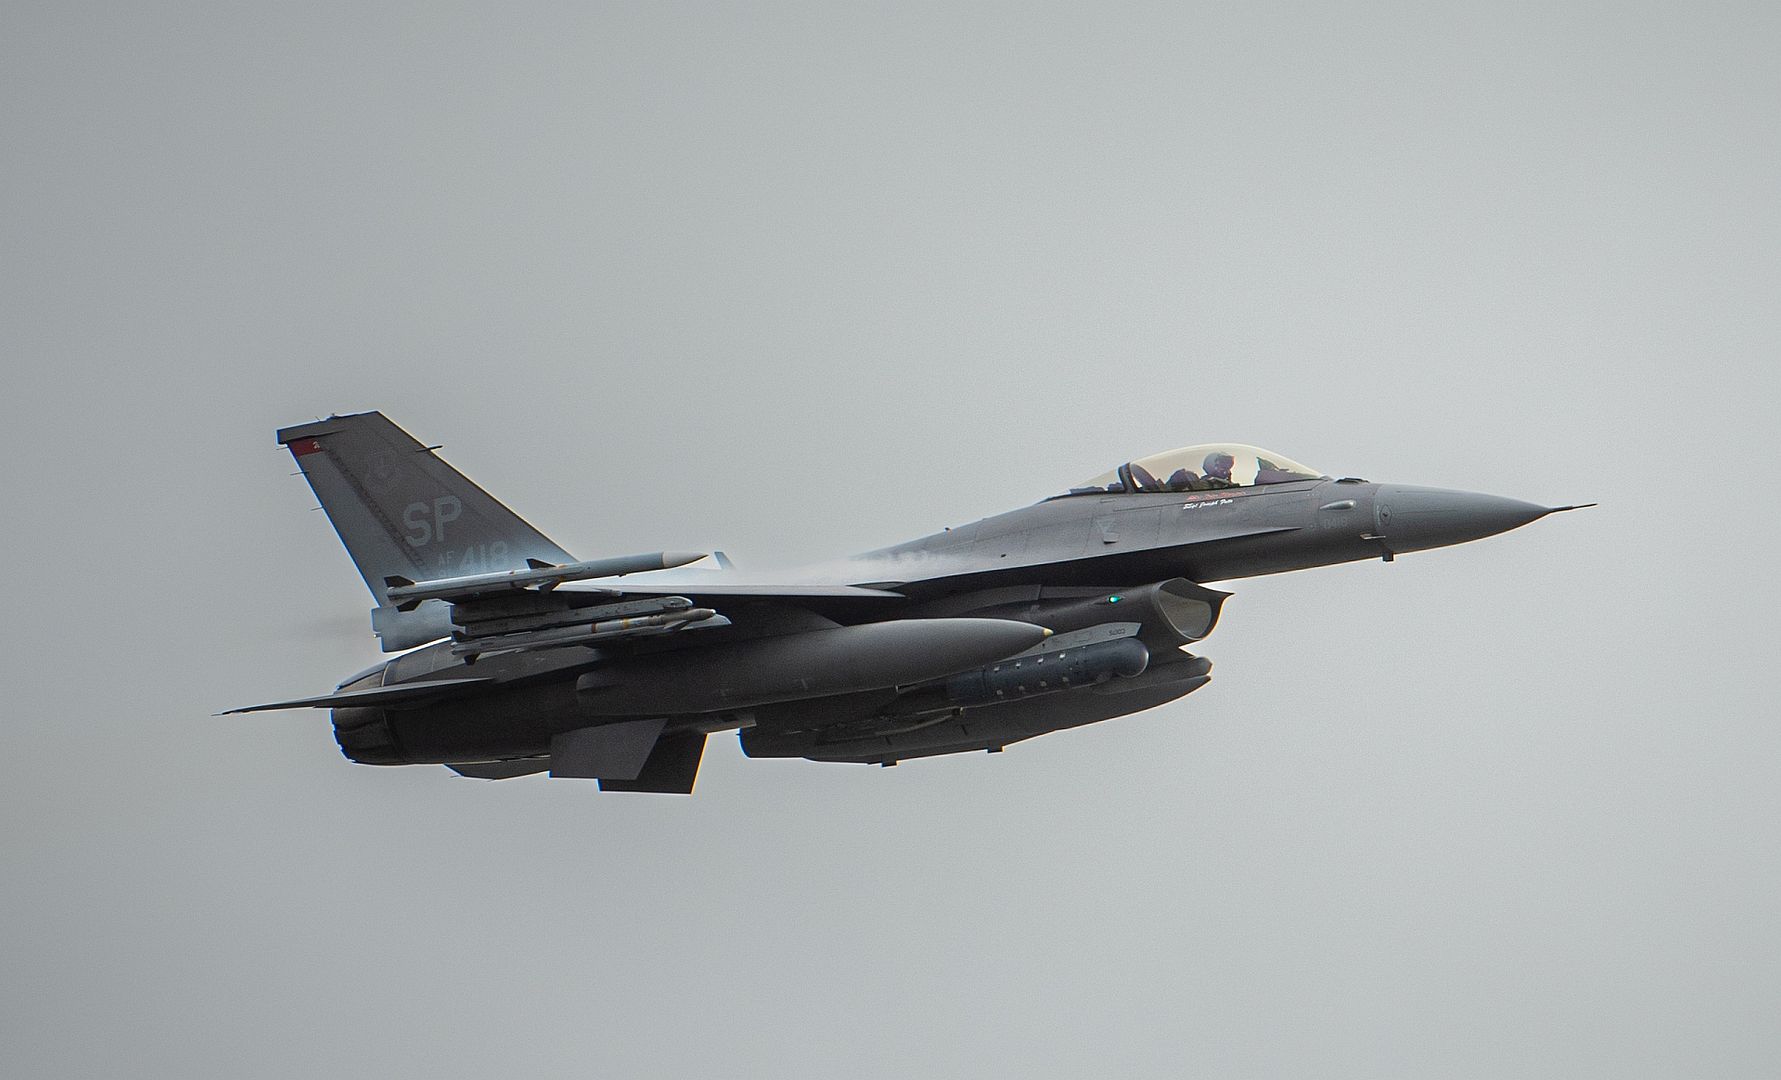 16 Fighting Falcon Fighter Aircraft Assigned To The 480th Fighter Squadron Departs Spangdahlem Air Base Germany To Support North Atlantic Treaty Organization